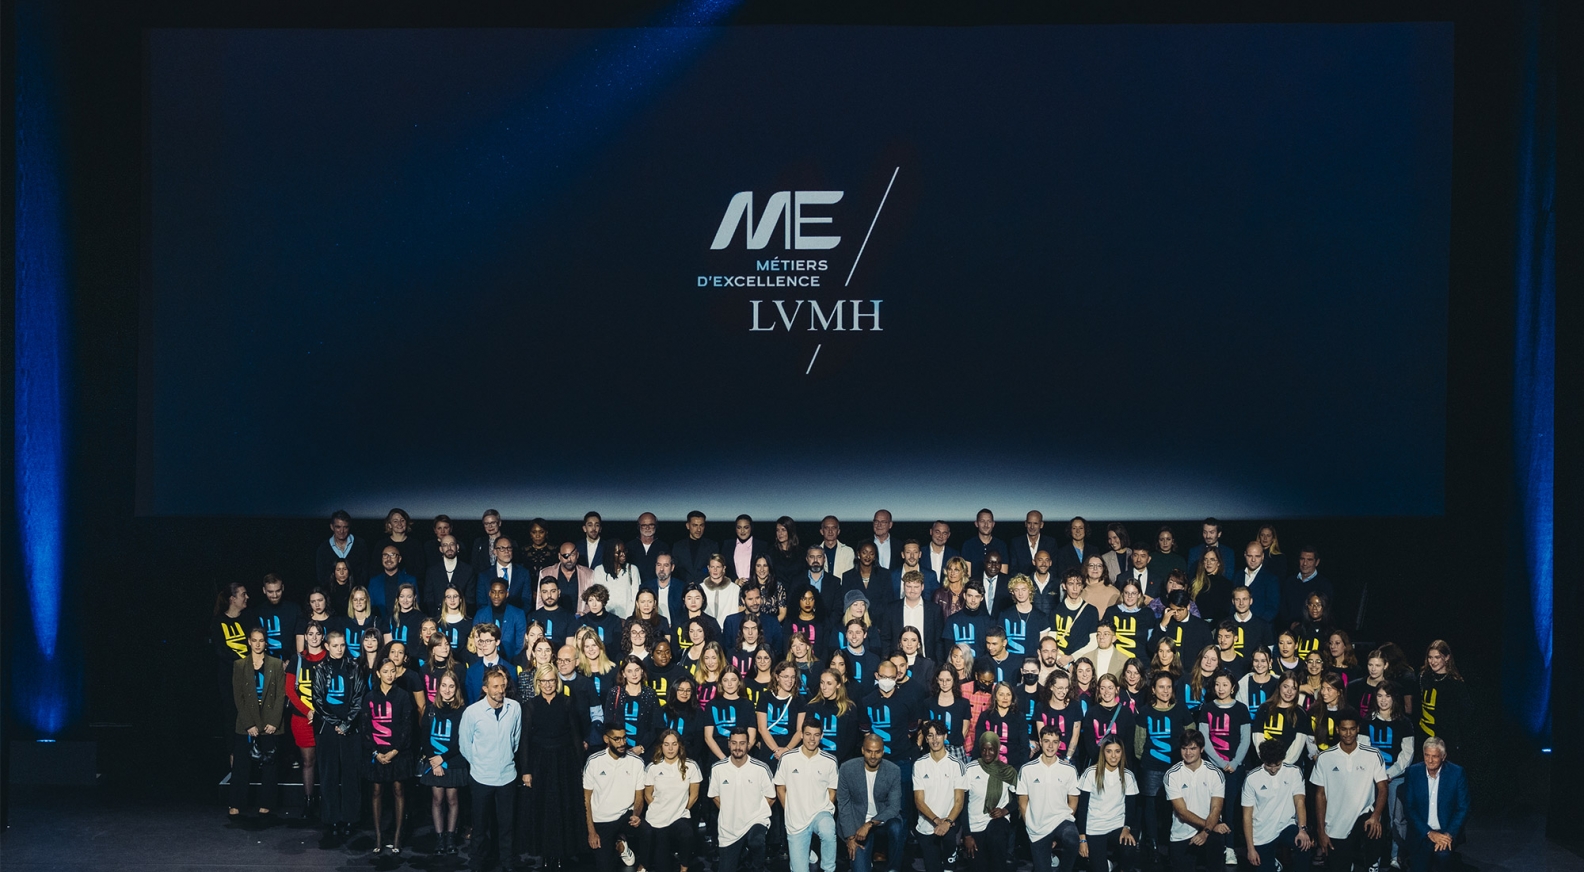 LVMH continues to promote and preserve the Métiers d'Excellence to